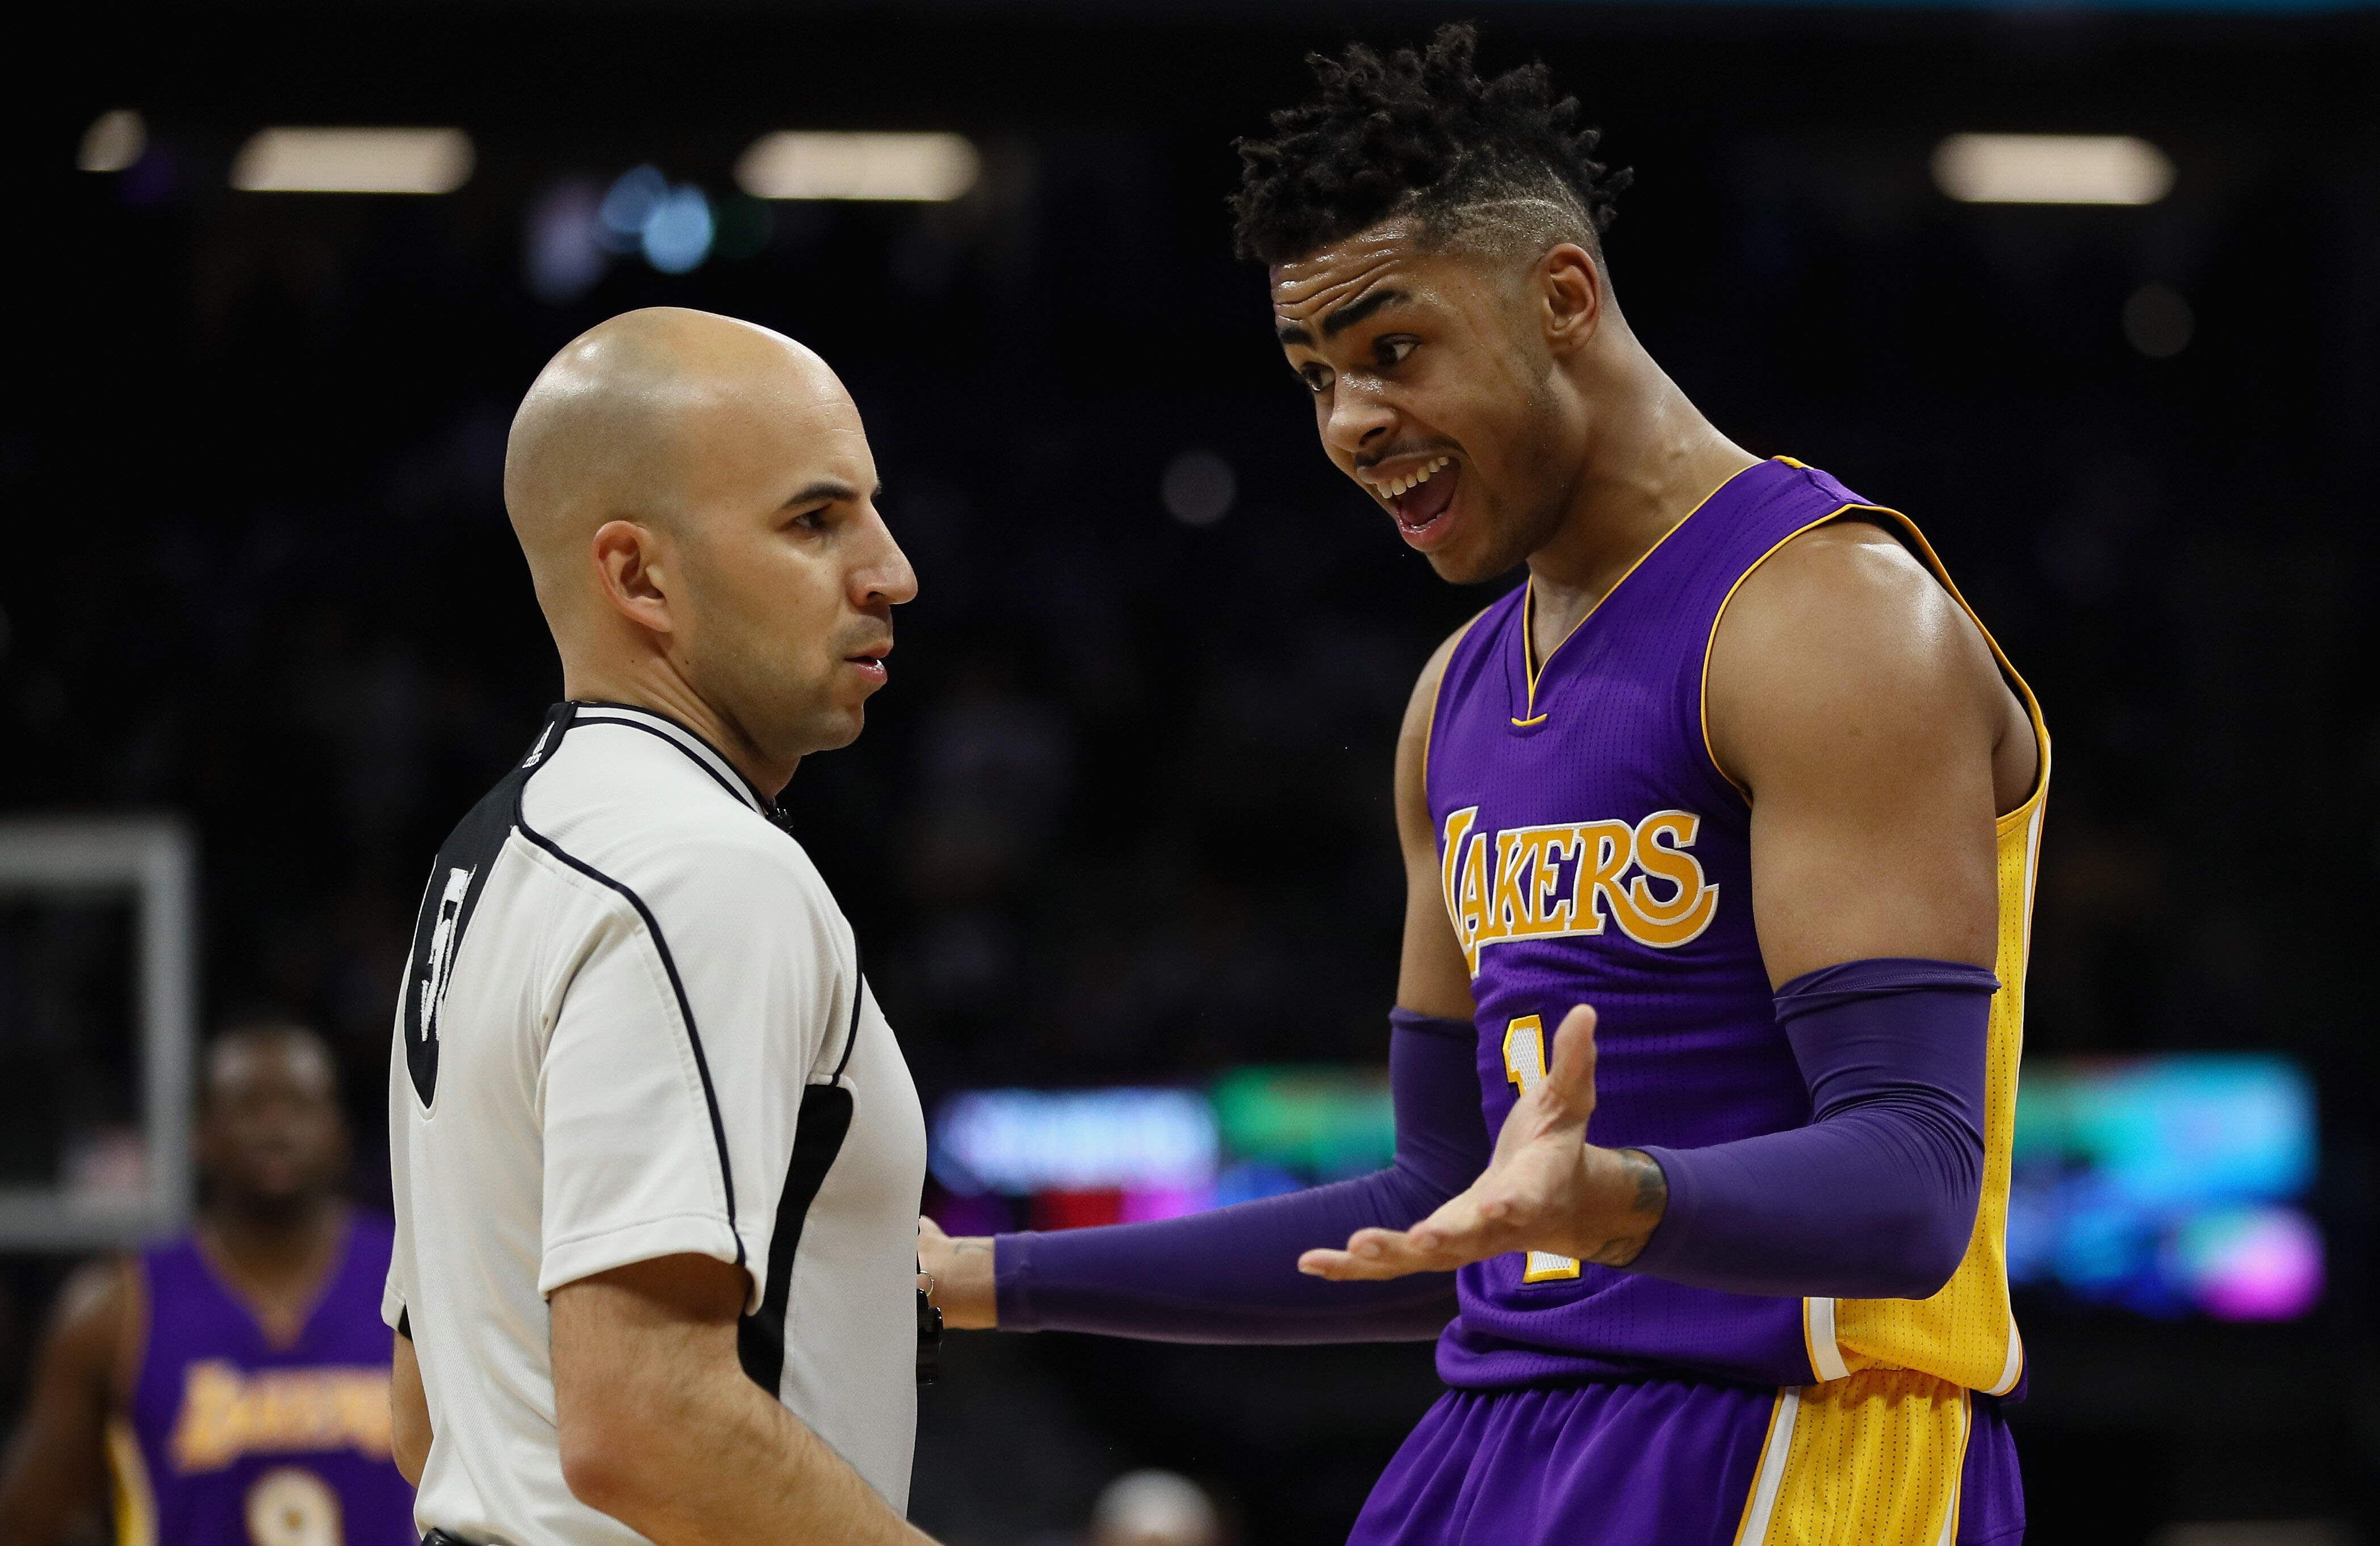 SACRAMENTO, CA - DECEMBER 12:  D'Angelo Russell #1 of the Los Angeles Lakers questions a call by referee Aaron Smith during their game against the Sacramento Kings at Golden 1 Center on December 12, 2016 in Sacramento, California.  NOTE TO USER: User expr